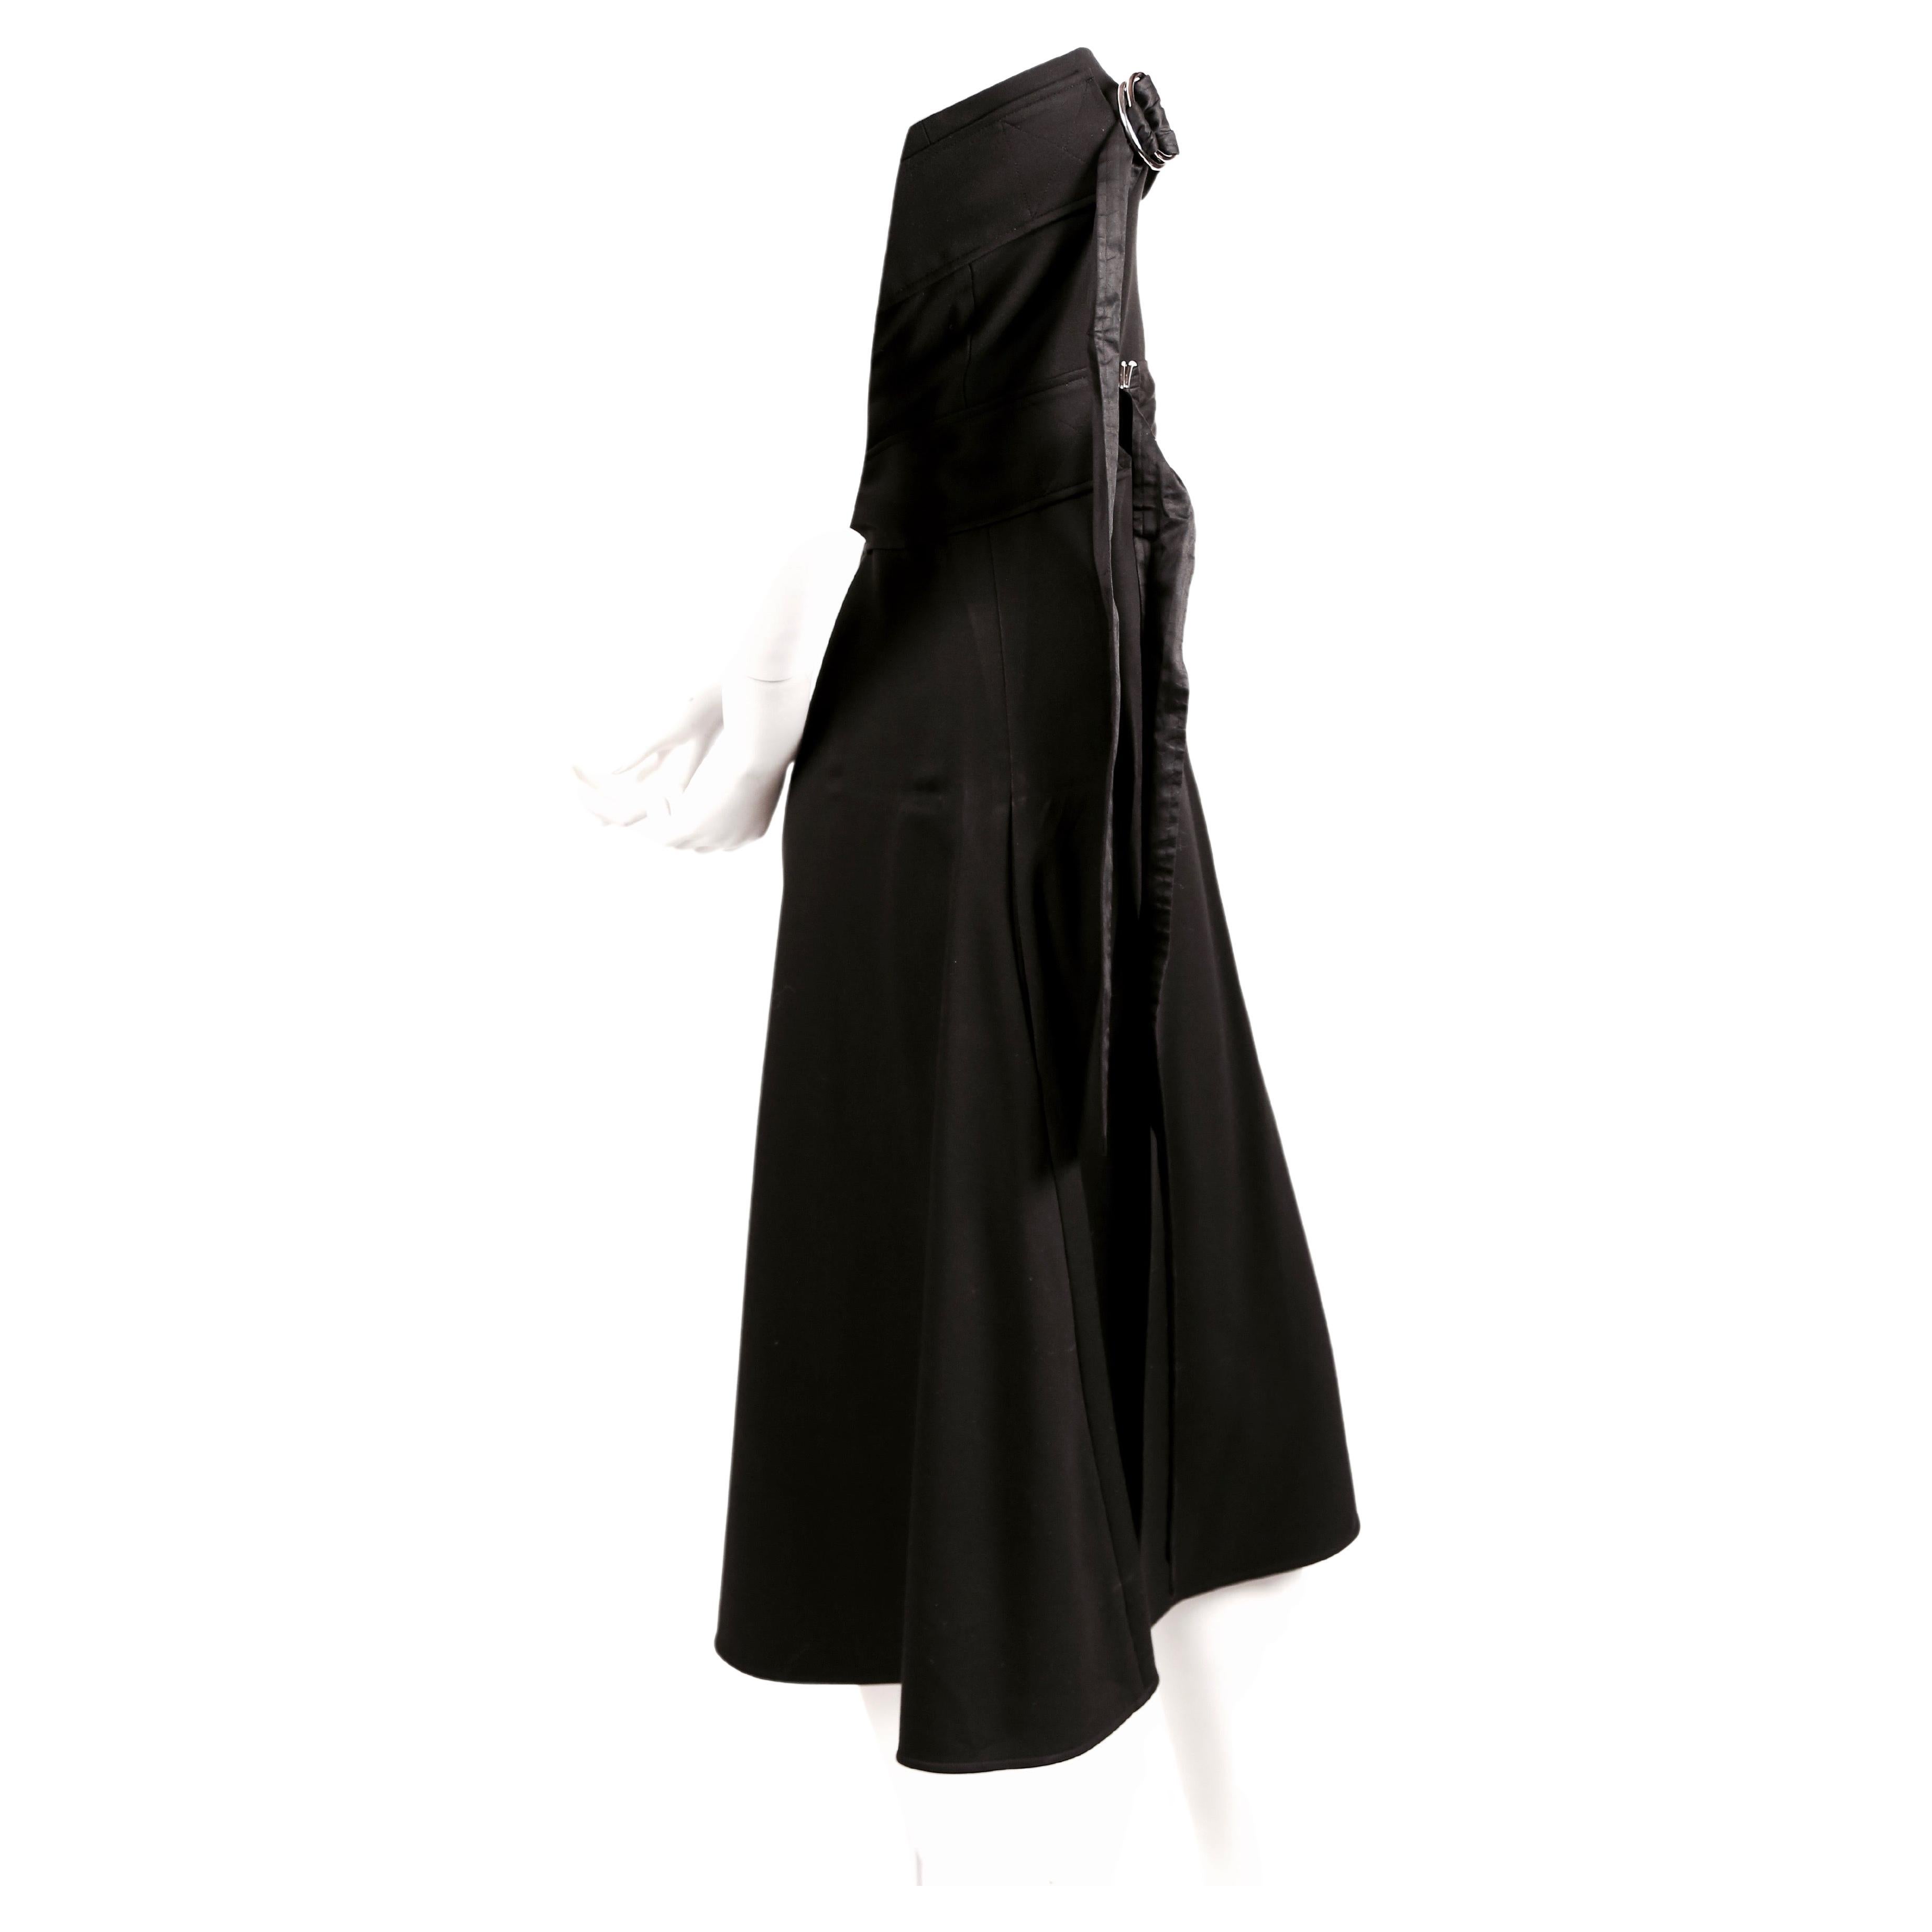 2014 CELINE BY PHOEBE PHILO black strapless dress with belts In Good Condition In San Fransisco, CA